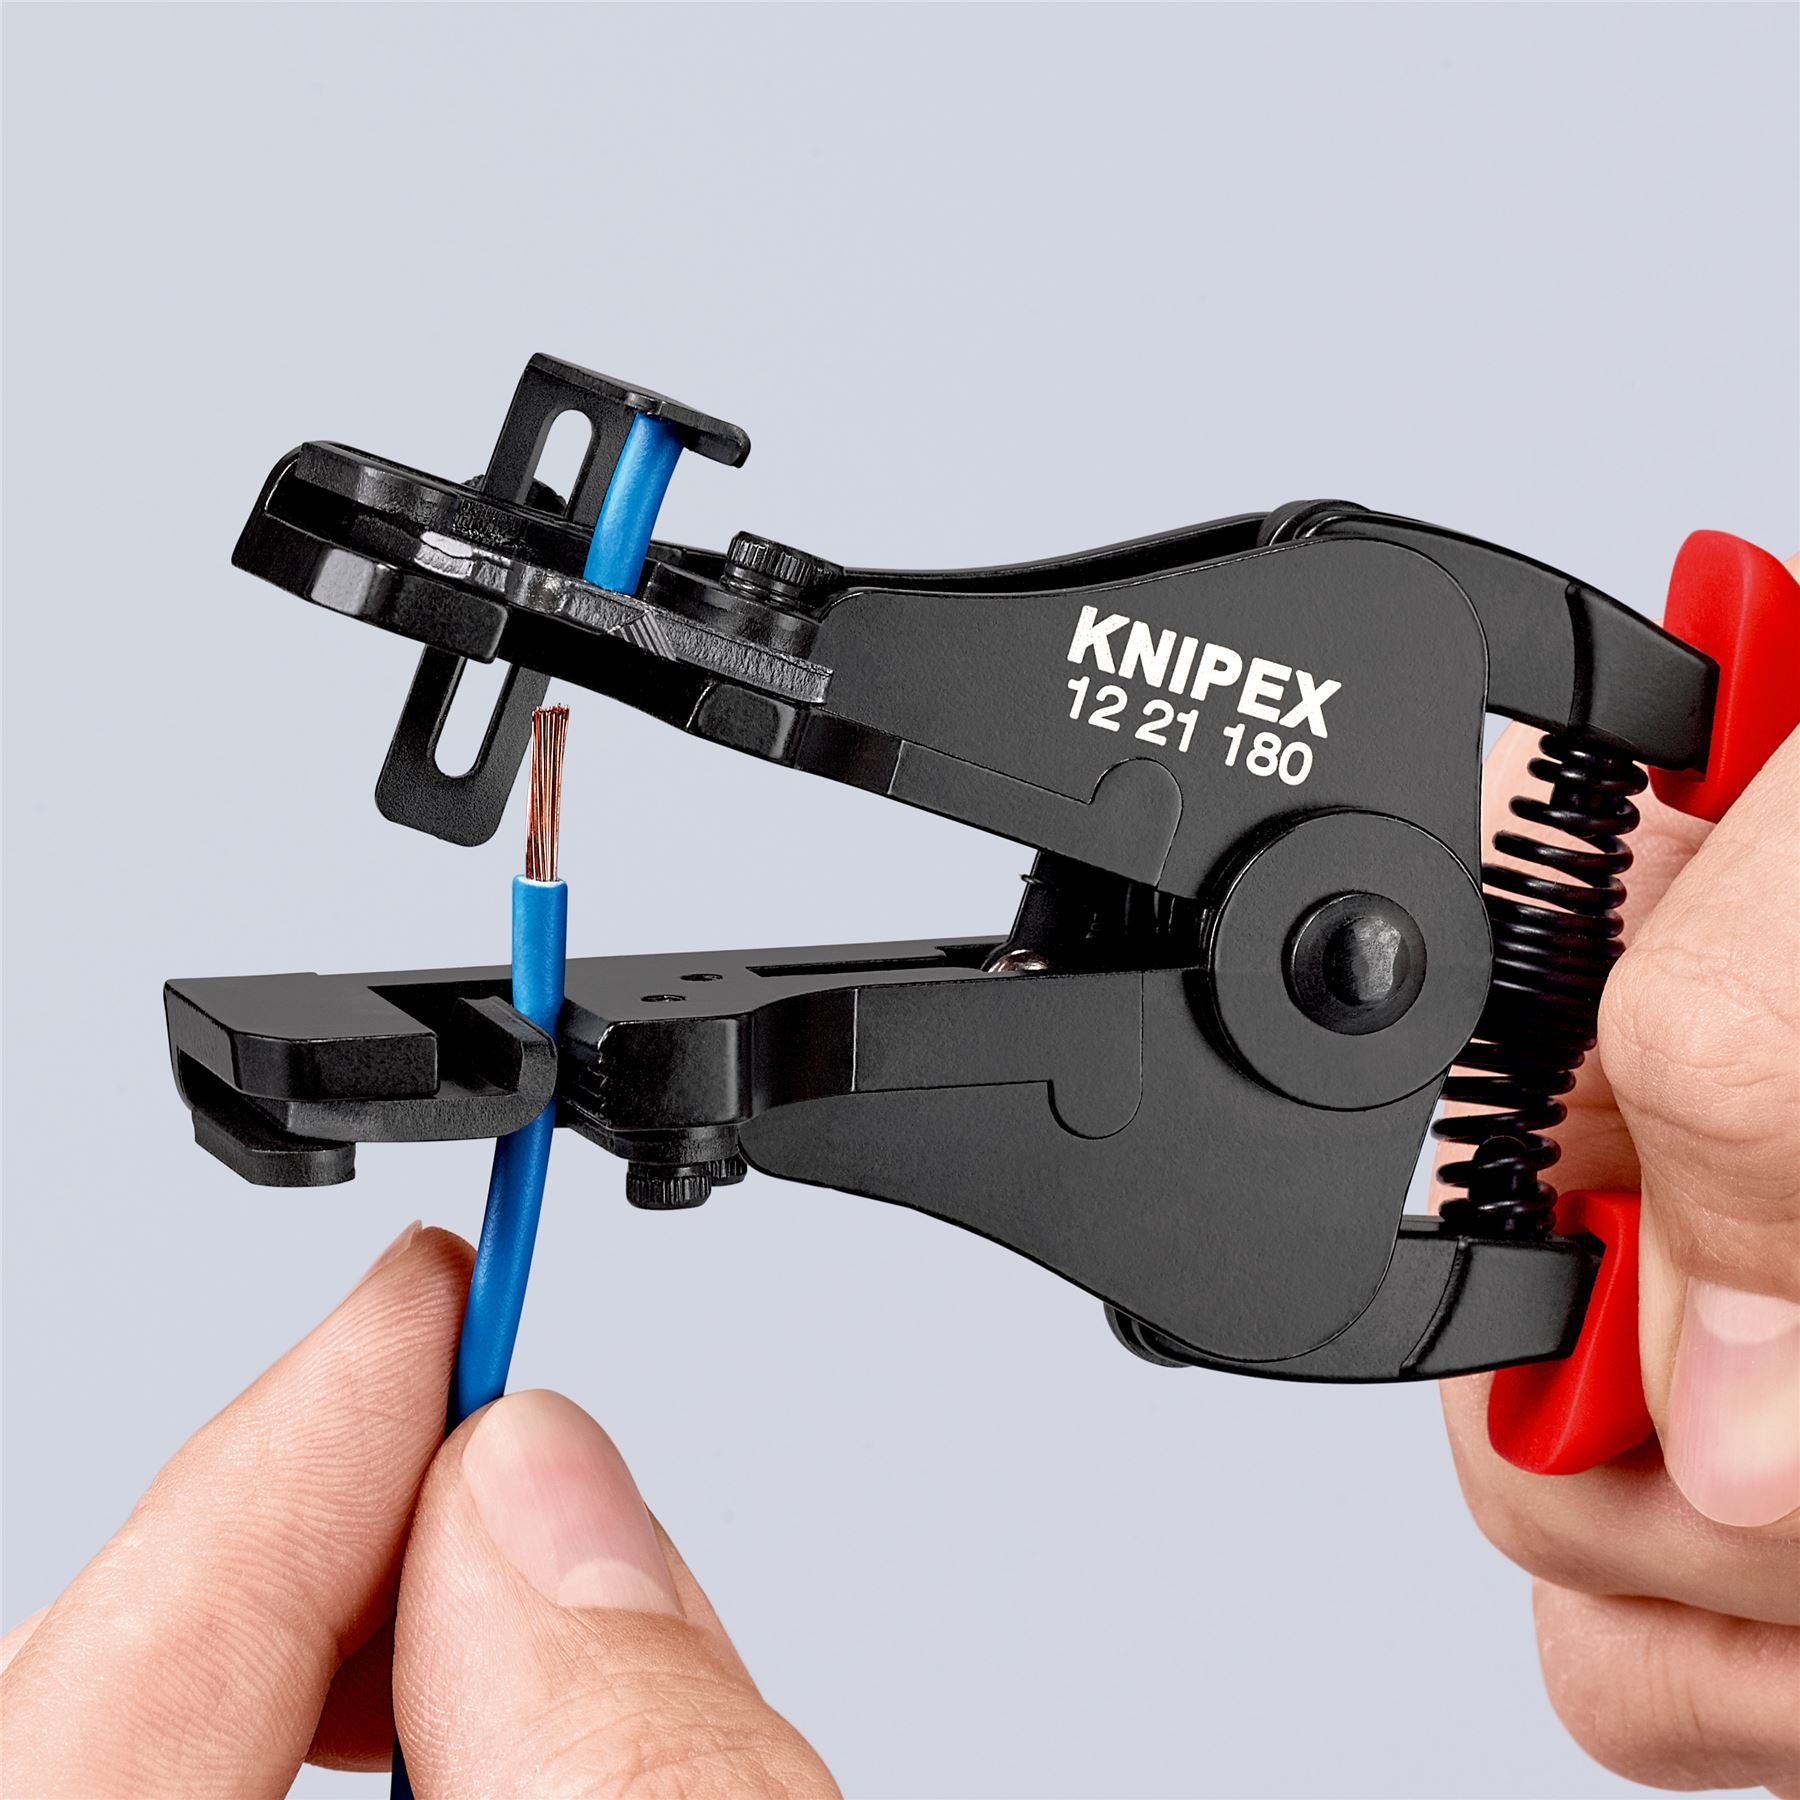 KNIPEX Insulation Stripper with Adapted Blades 180mm Stripping Pliers Plastic Coated 12 21 180